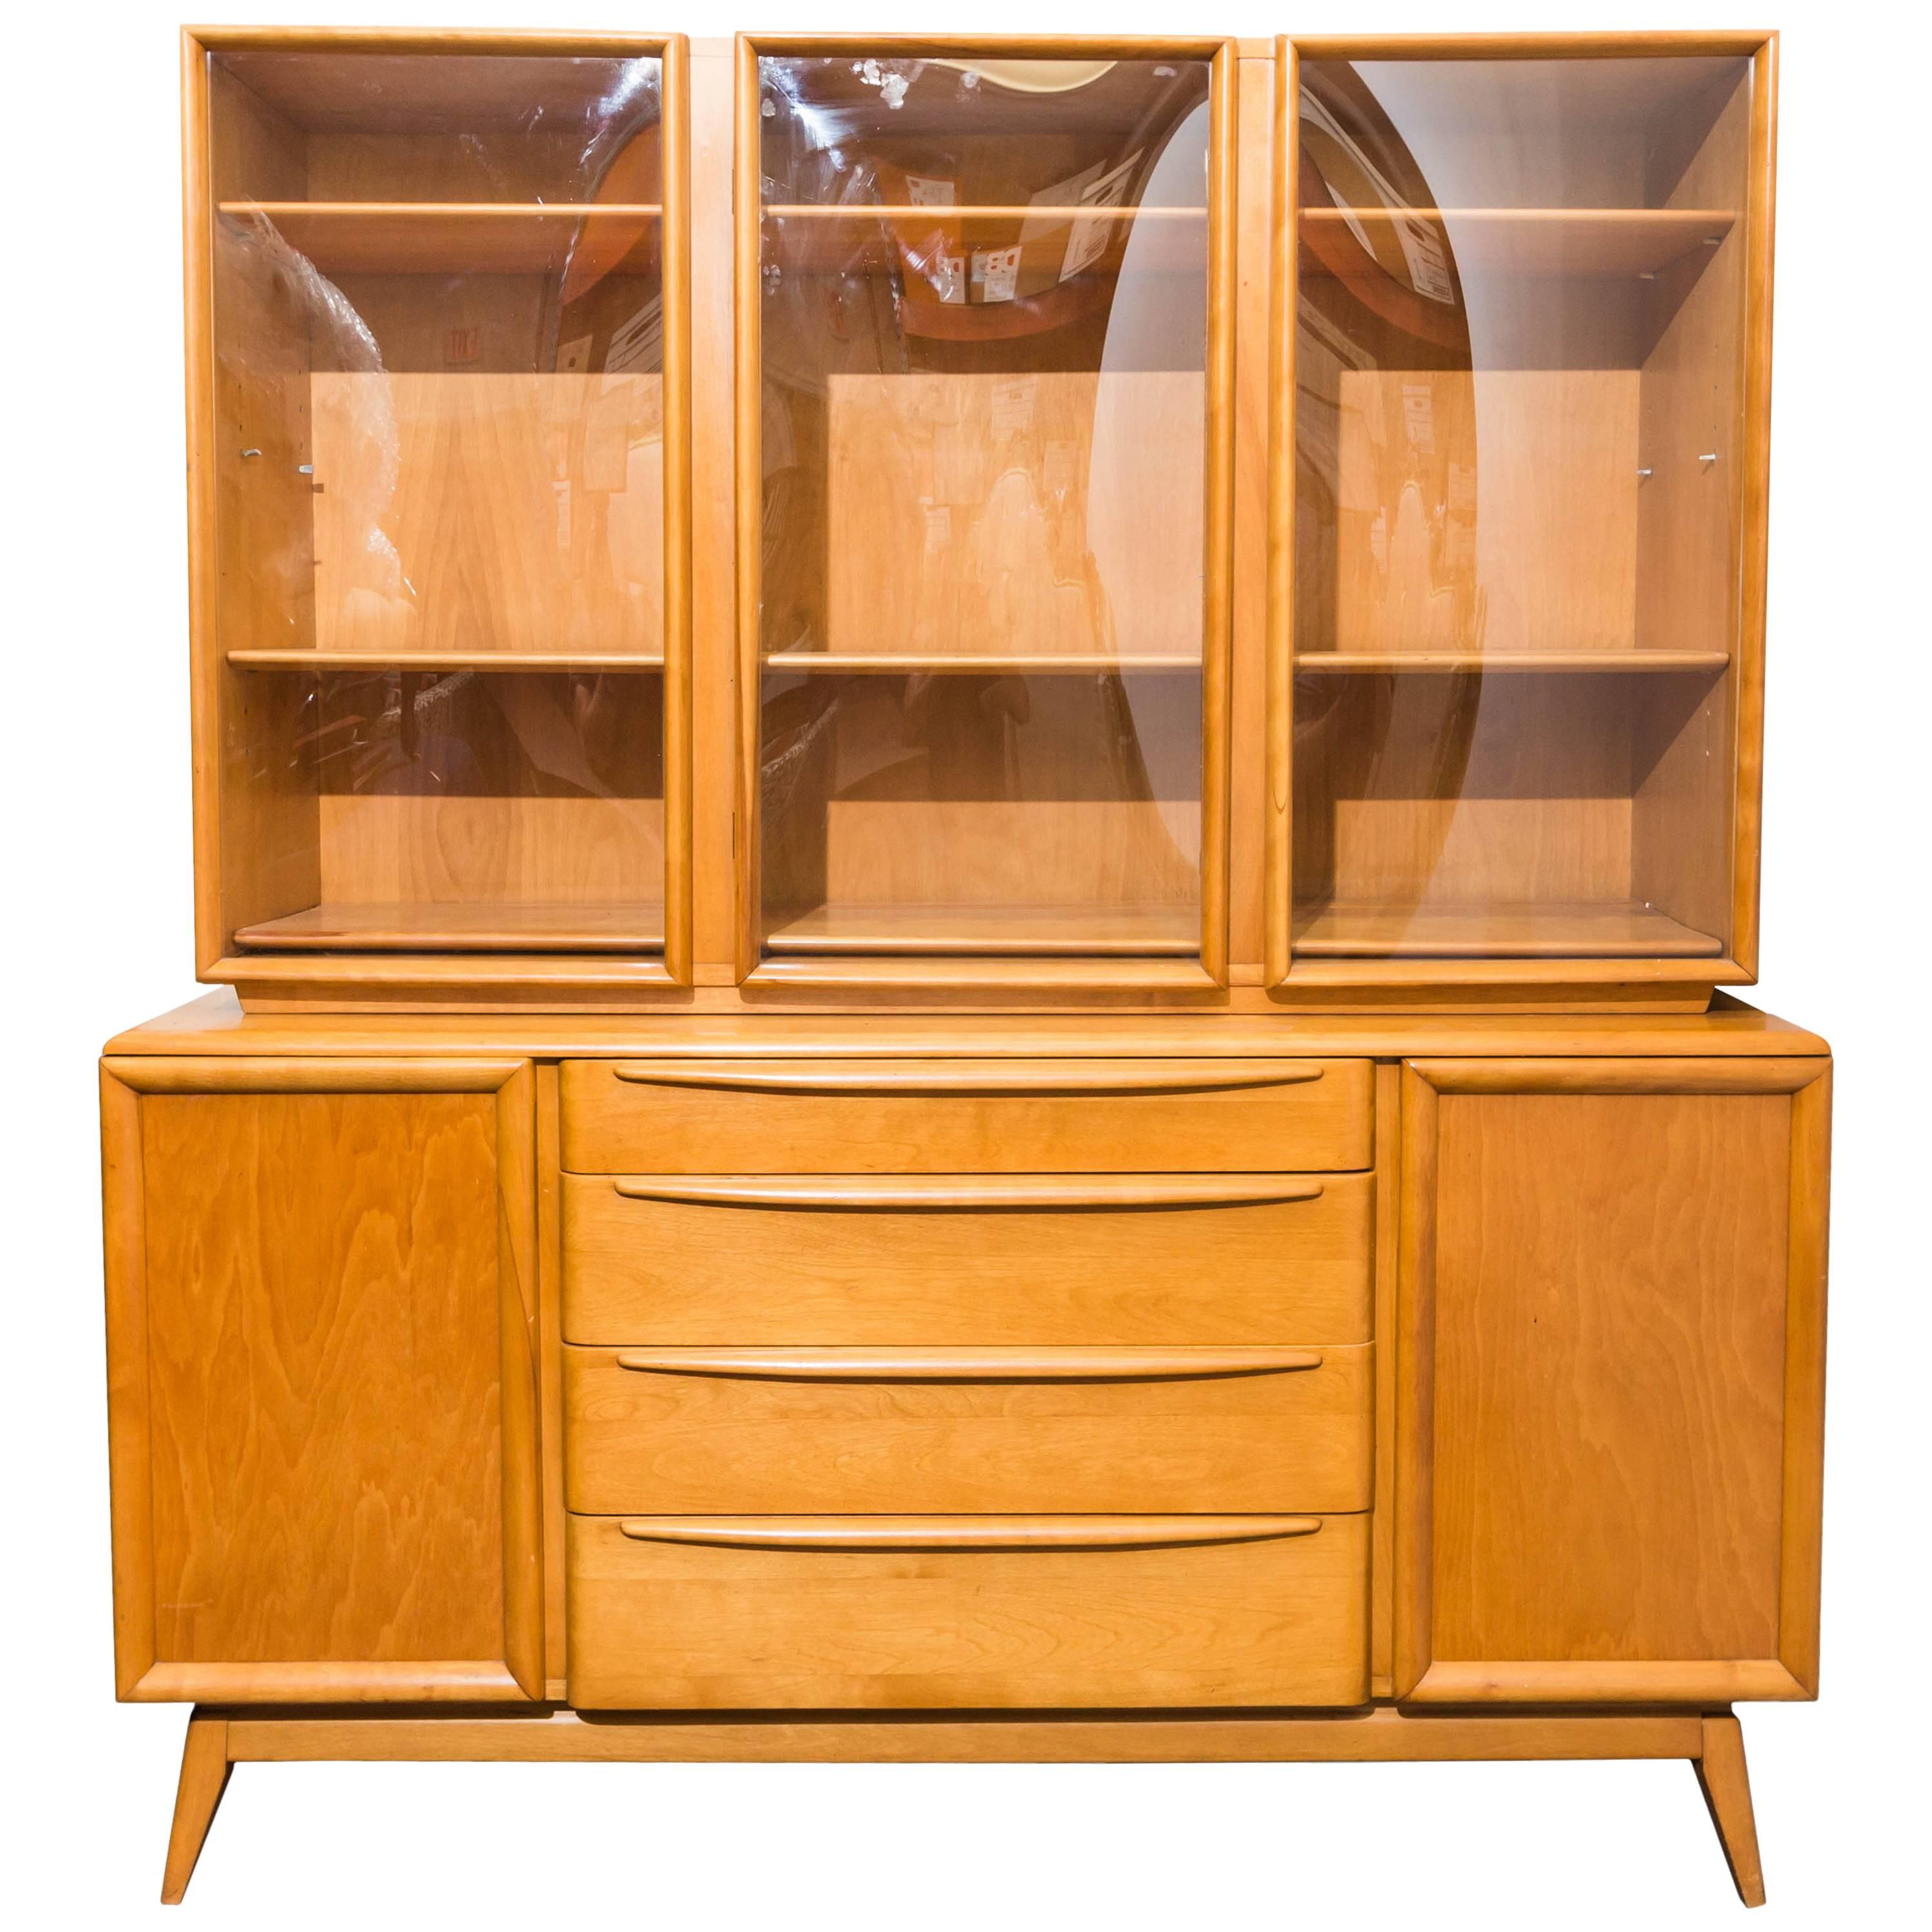 Haywood-Wakefield Buffet and Hutch For Sale